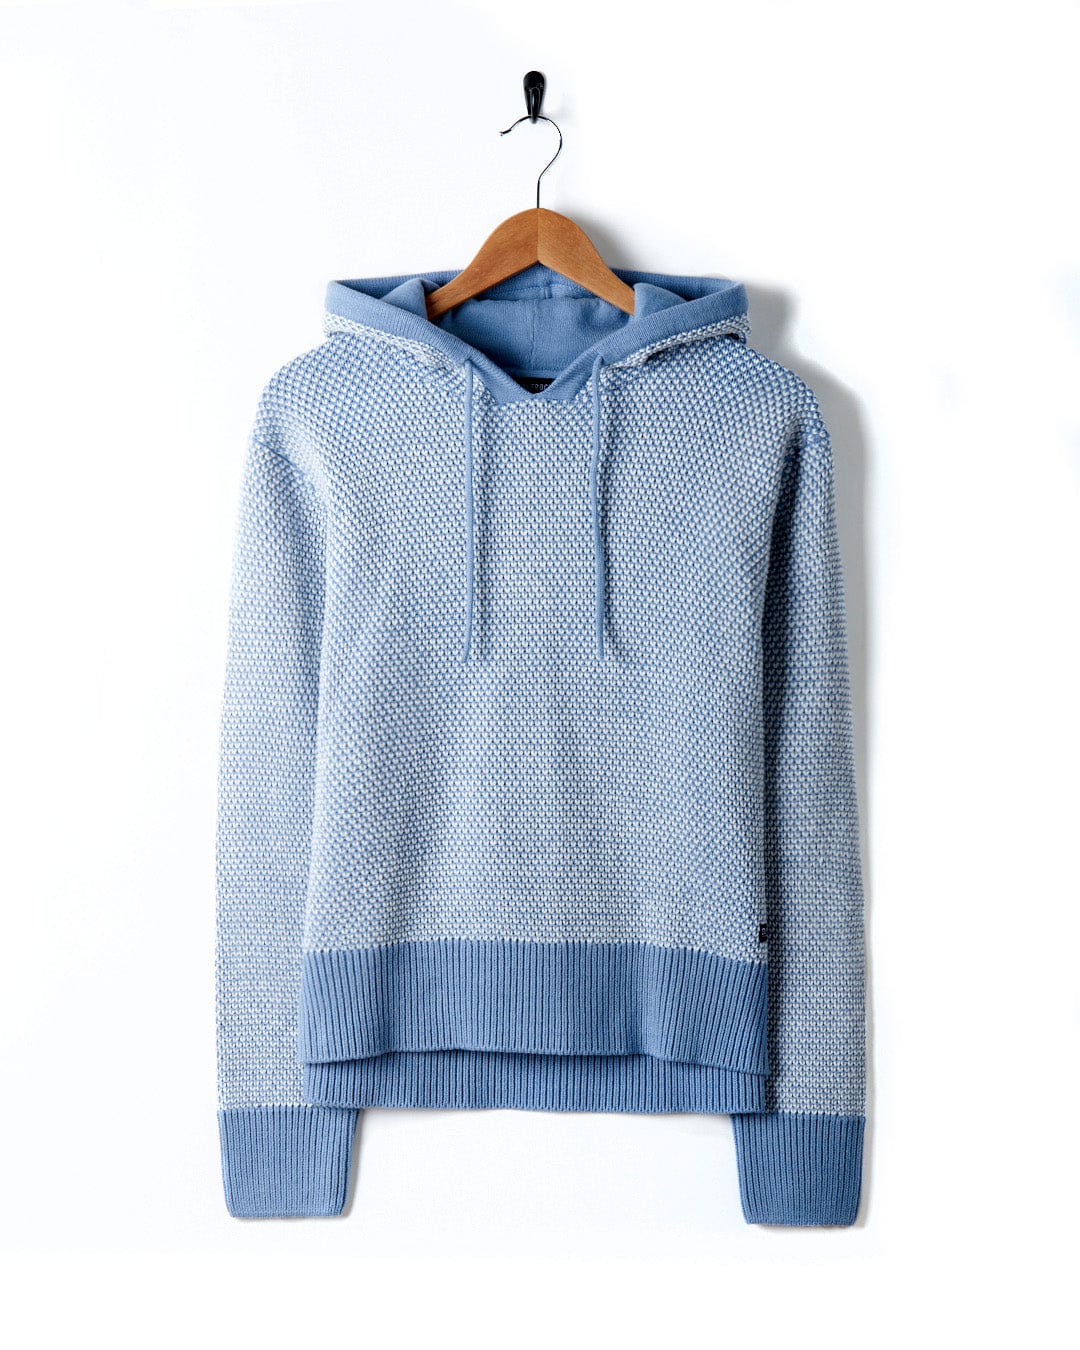 A blue sweater with textured knit, featuring Saltrock branding, on a Poppy - Womens Knitted Pop Hoodie - Blue.